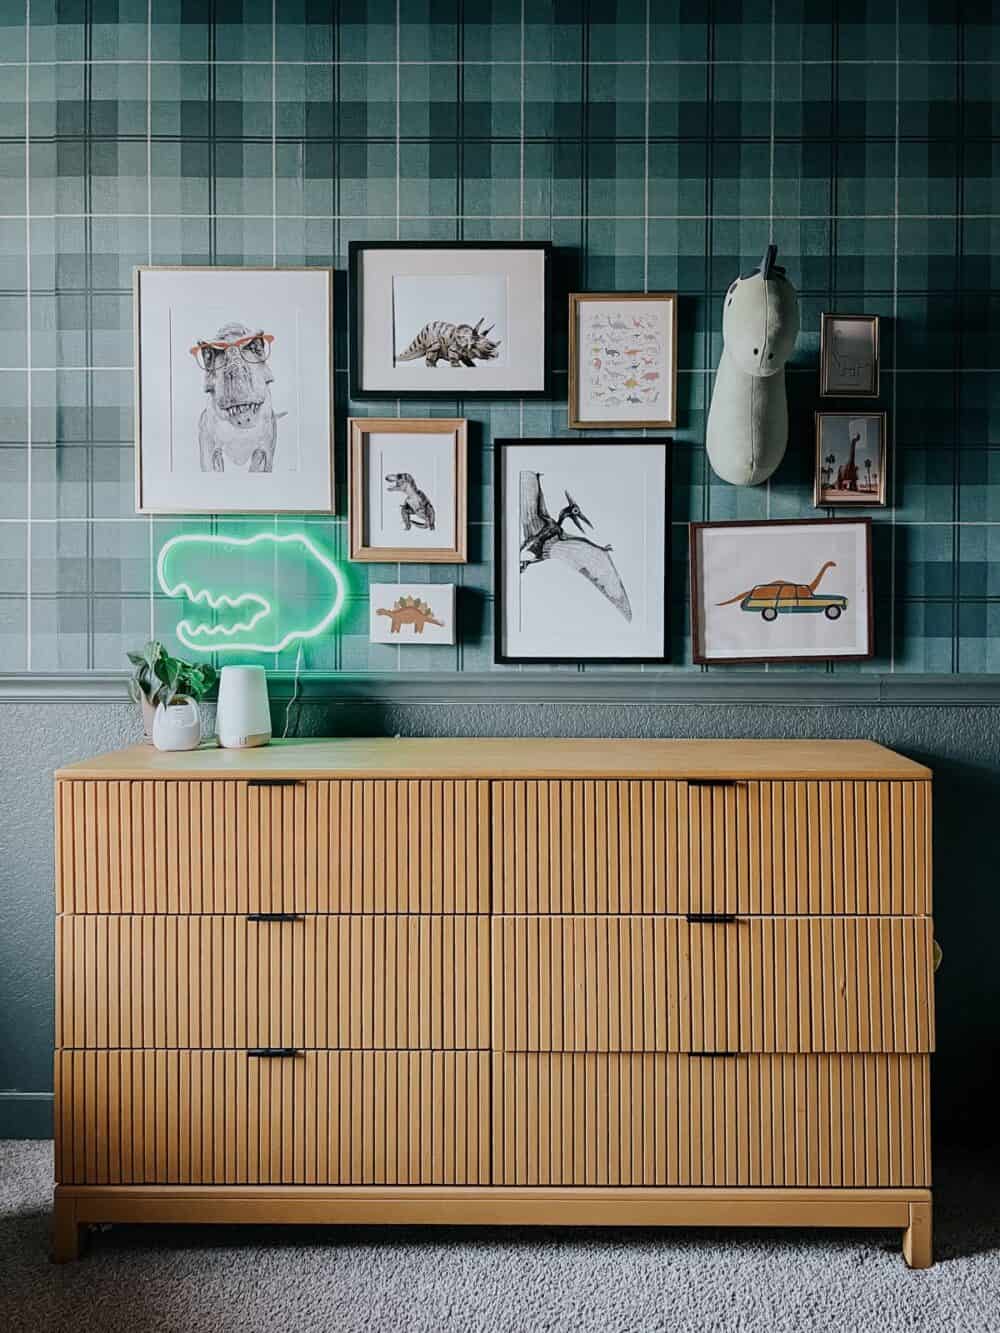 Dinosaur themed gallery wall with a yellow dresser underneath